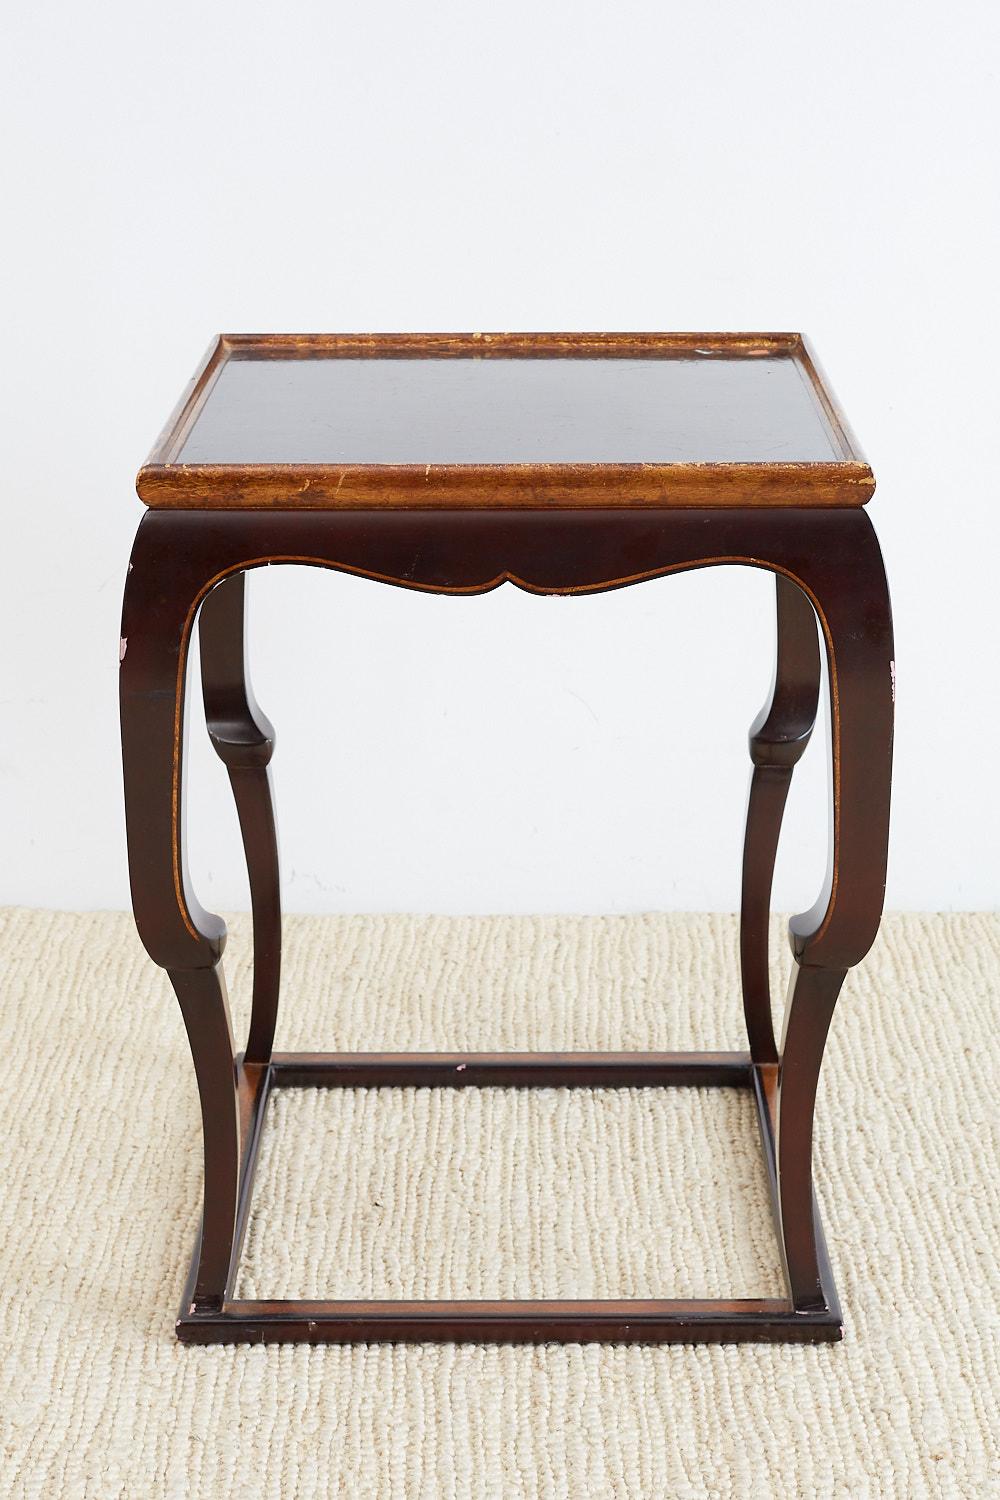 Distinctive English mahogany lacquered tavern table or drink table featuring a square cube form. The galleried top is accented by gilt trim as is the box stretcher on the bottom. The top is supported by unique legs that look like a cabriole leg on